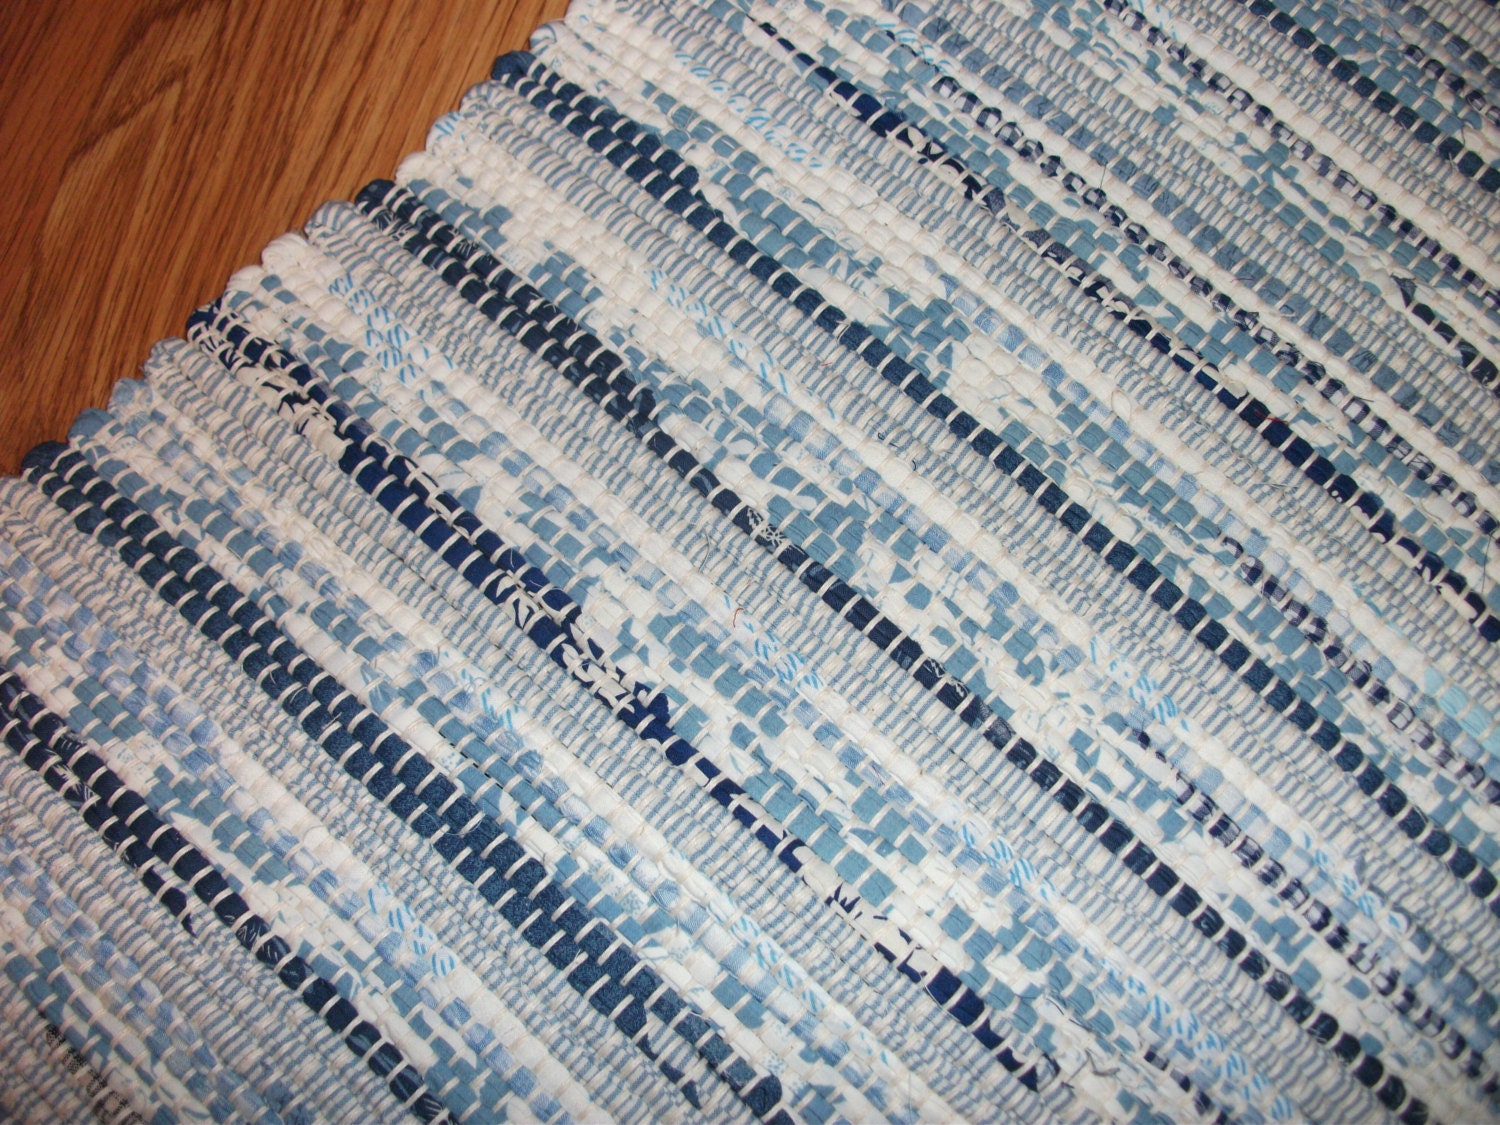 Classic blue and White Handwoven Rag Rug made of Recycled